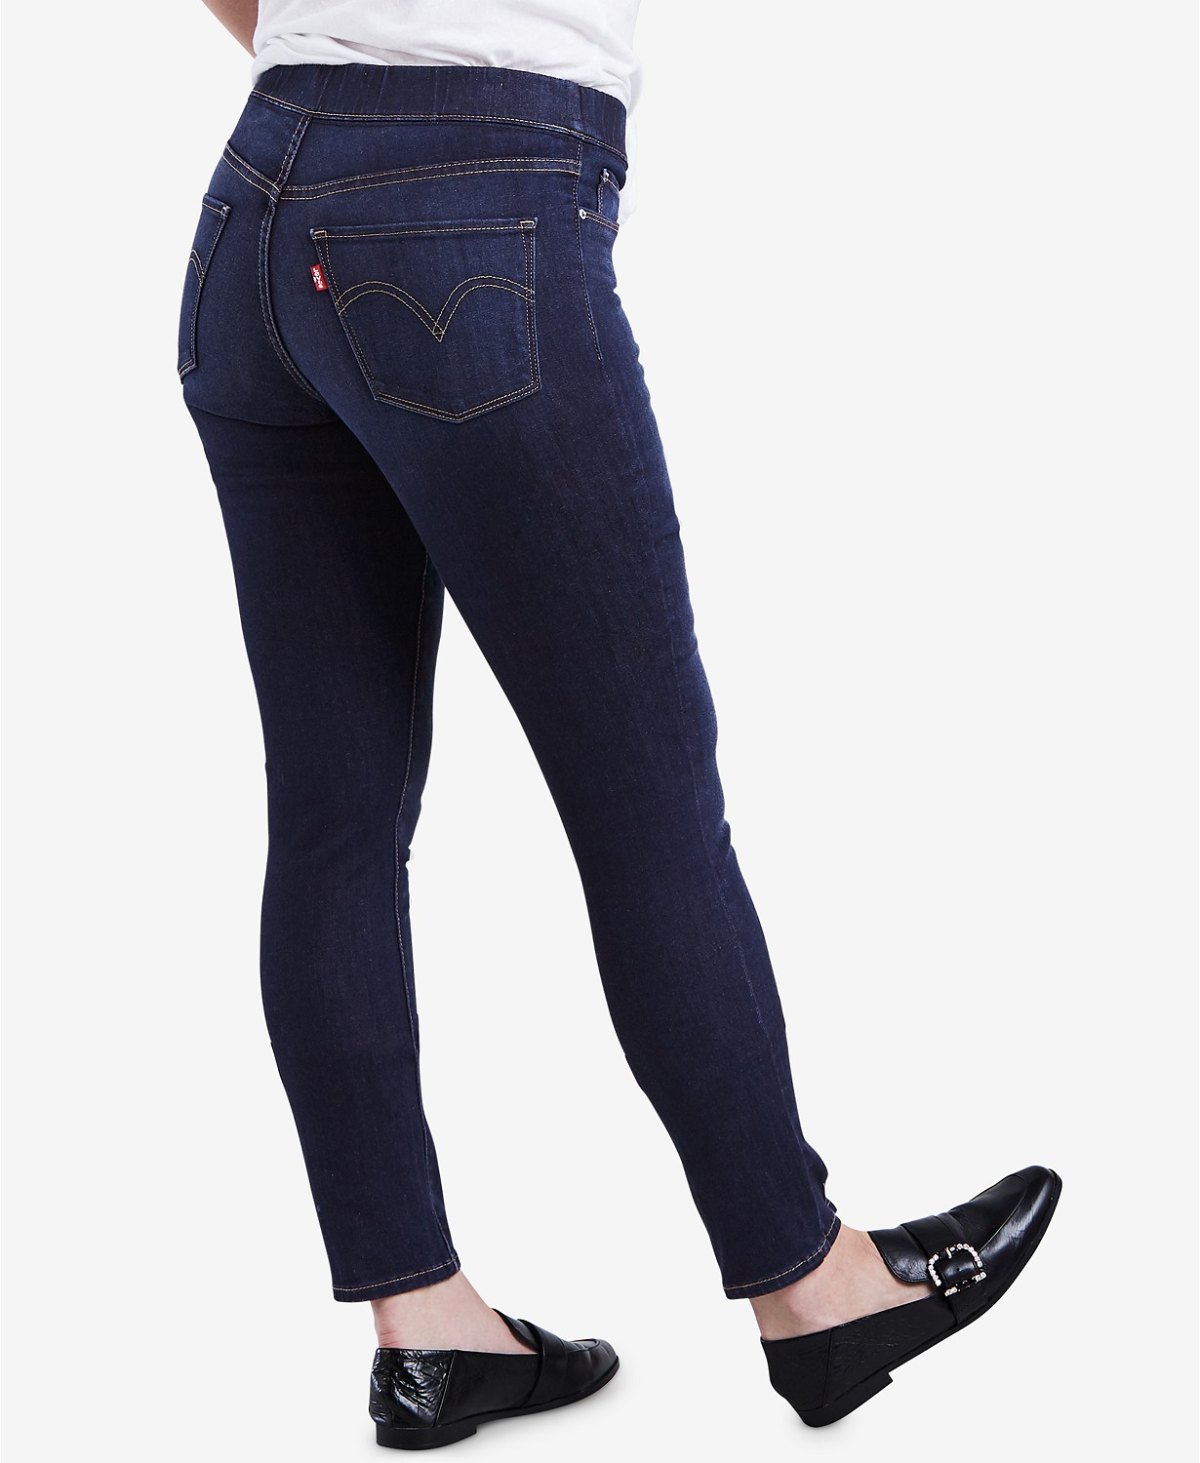 These Levi's Jeggings Look Like Jeans but Are as Comfy as Leggings